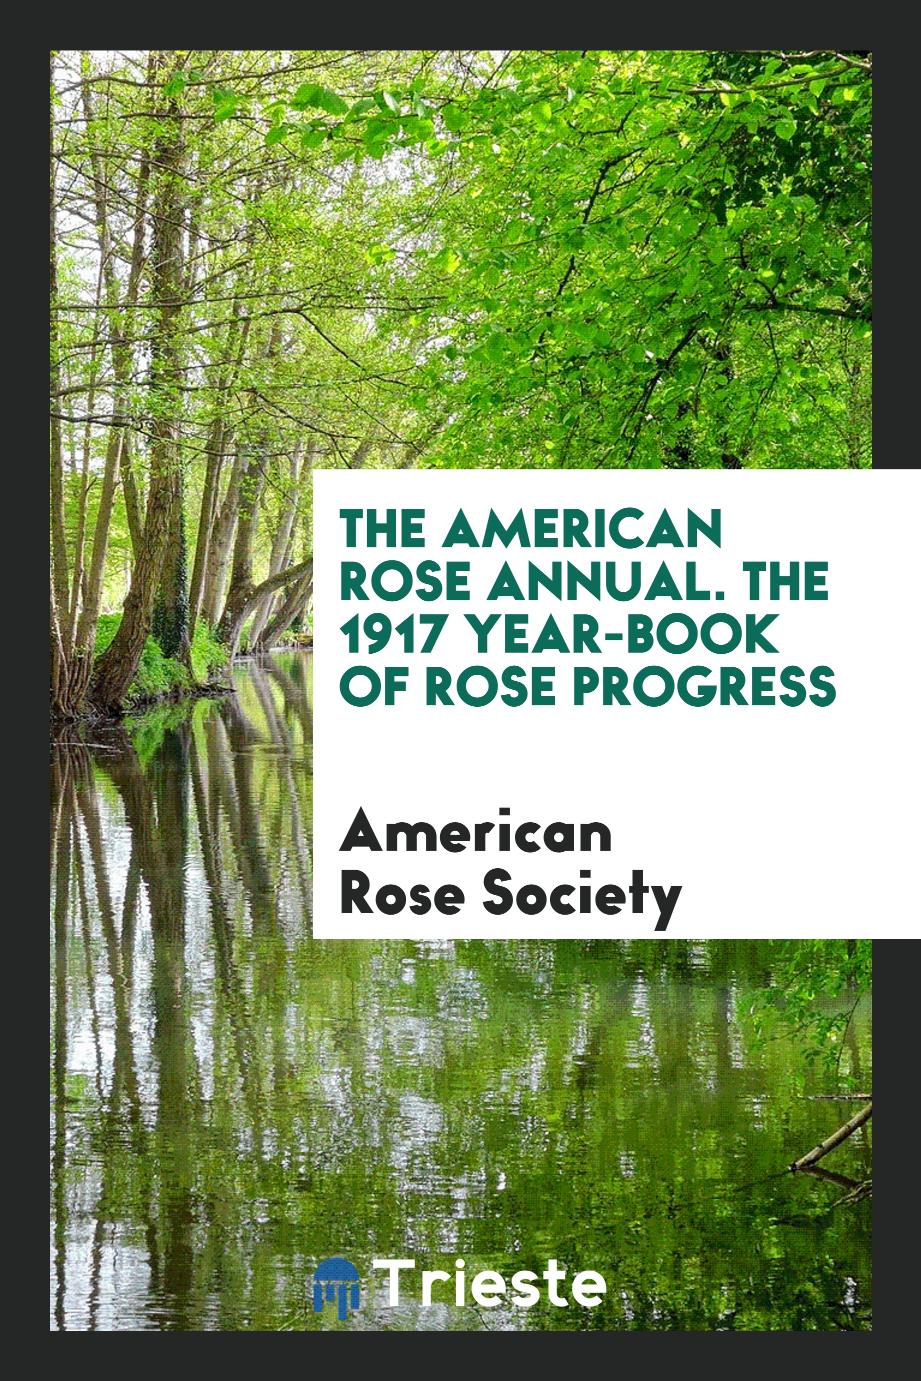 The American Rose Annual. The 1917 Year-Book of Rose Progress